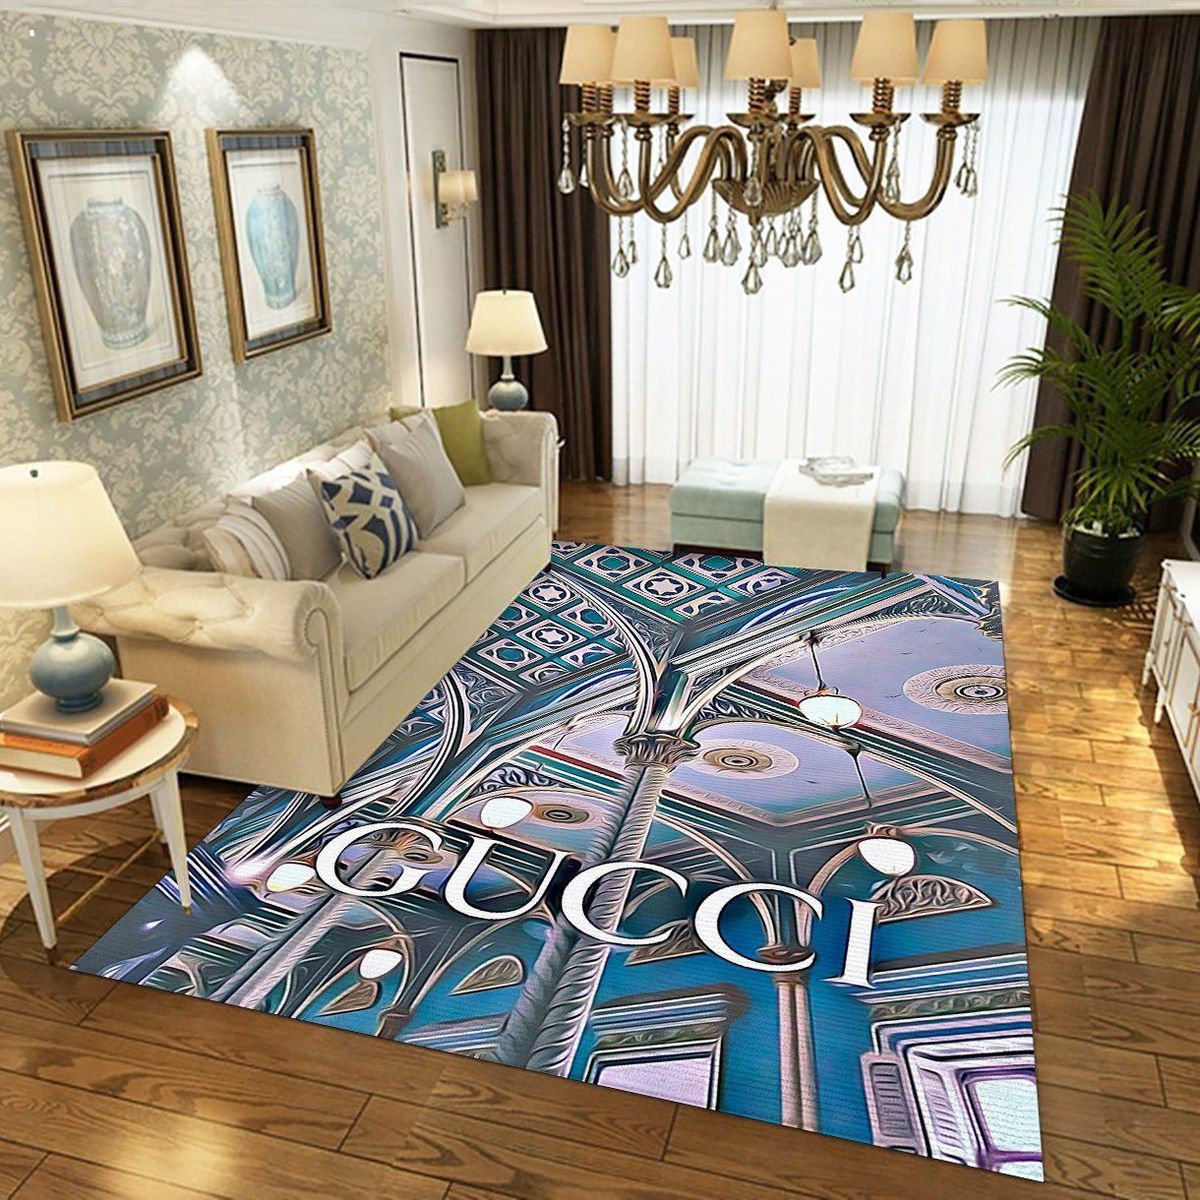 NEW Gucci Printing 3D Luxury Brand Carpet Rug Limited Edition